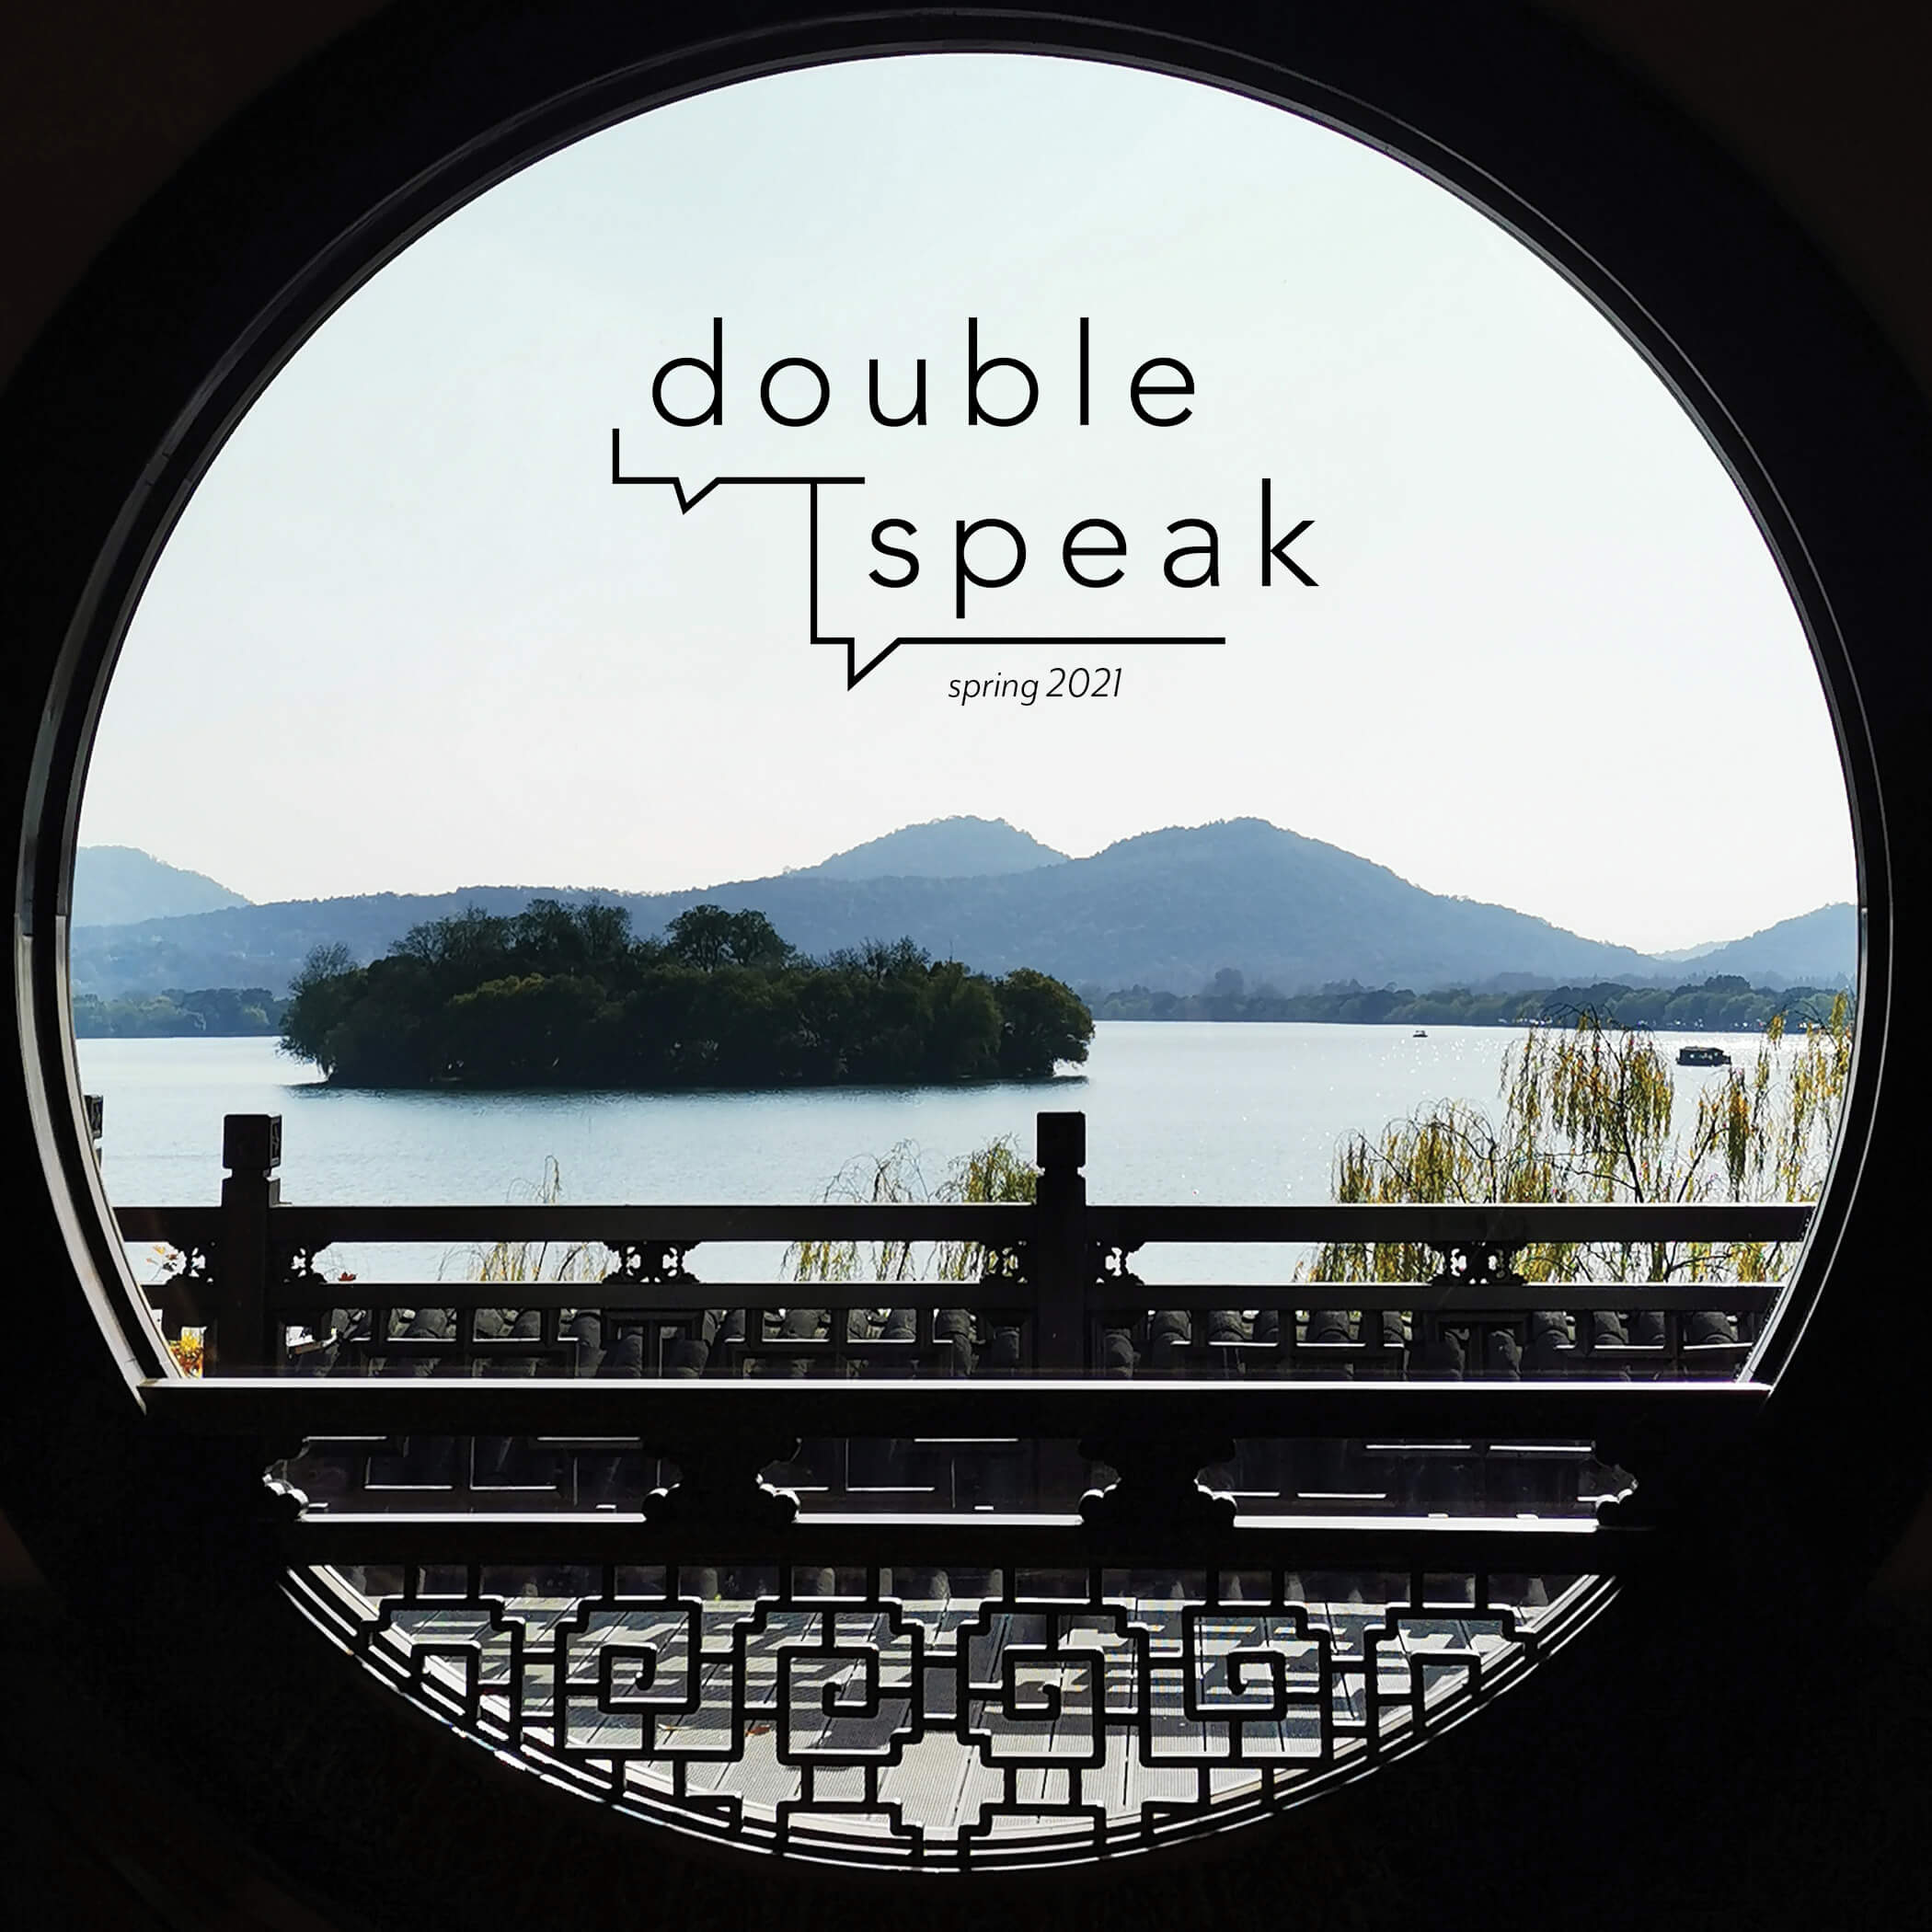 spring 2021 cover: a view of a mountain over a body of water, seen through a round window.